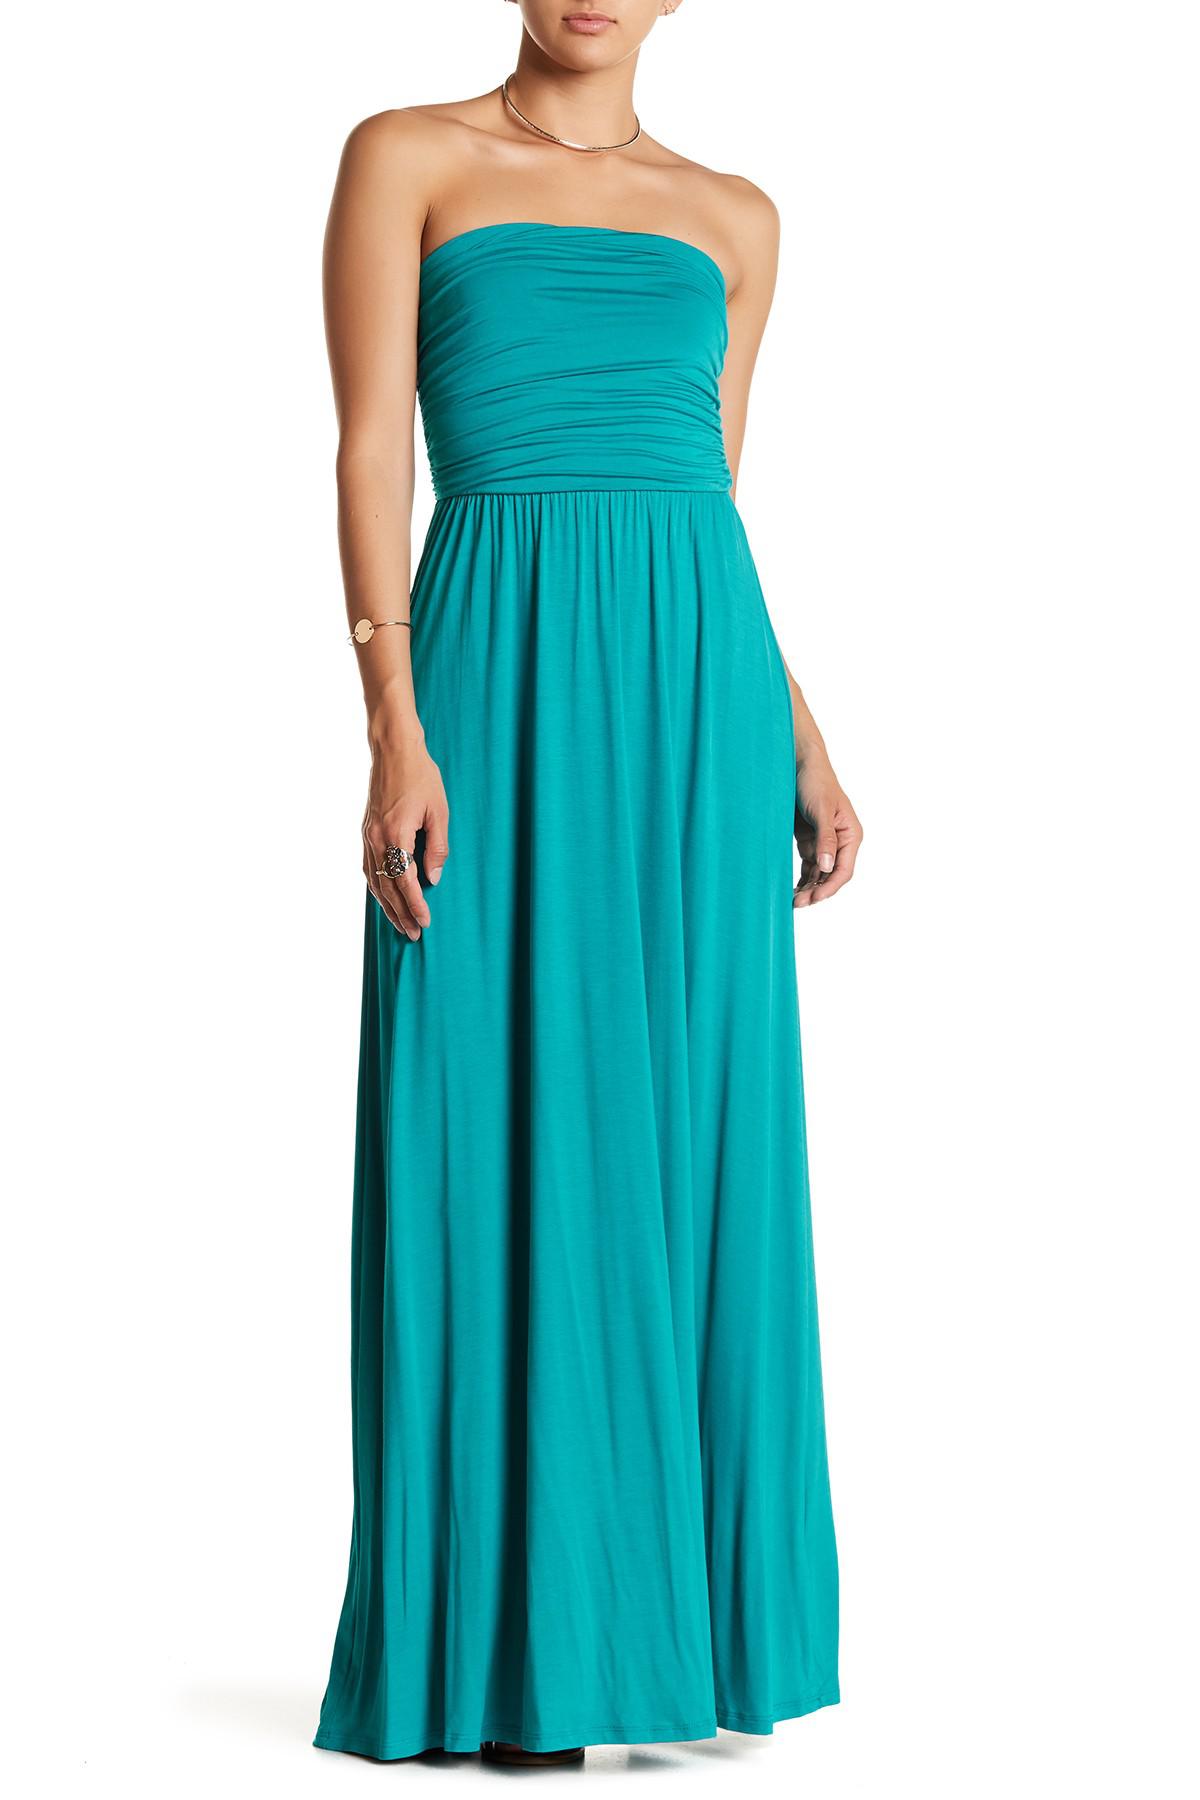 Lyst - West Kei Strapless Maxi Dress in Blue